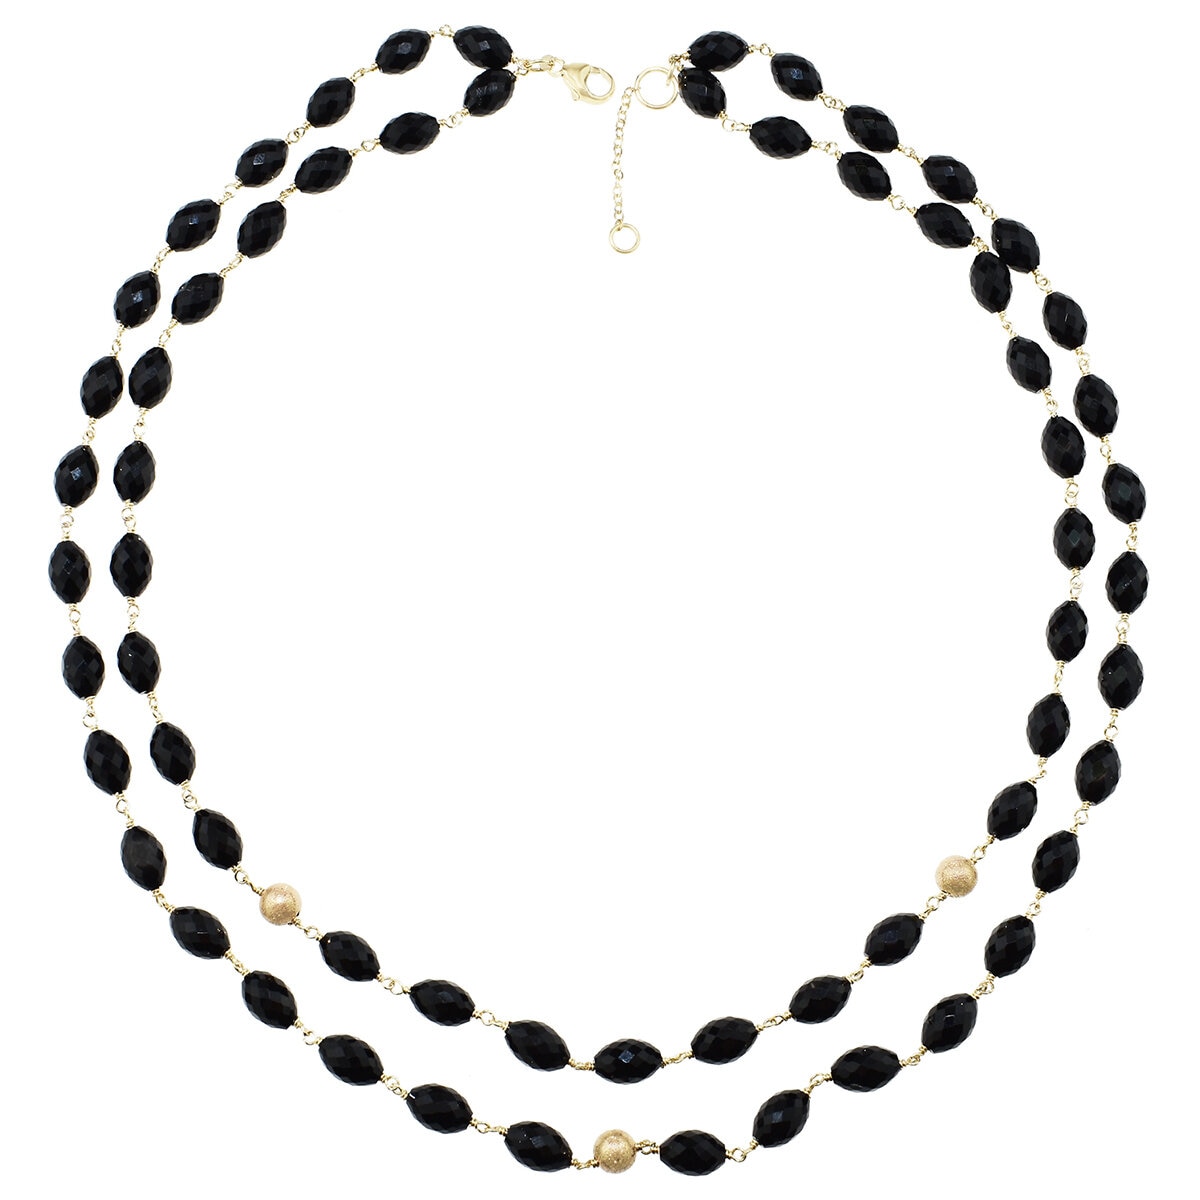 14KT Yellow Gold Faceted Black Onyx 2 Row Layered Necklace